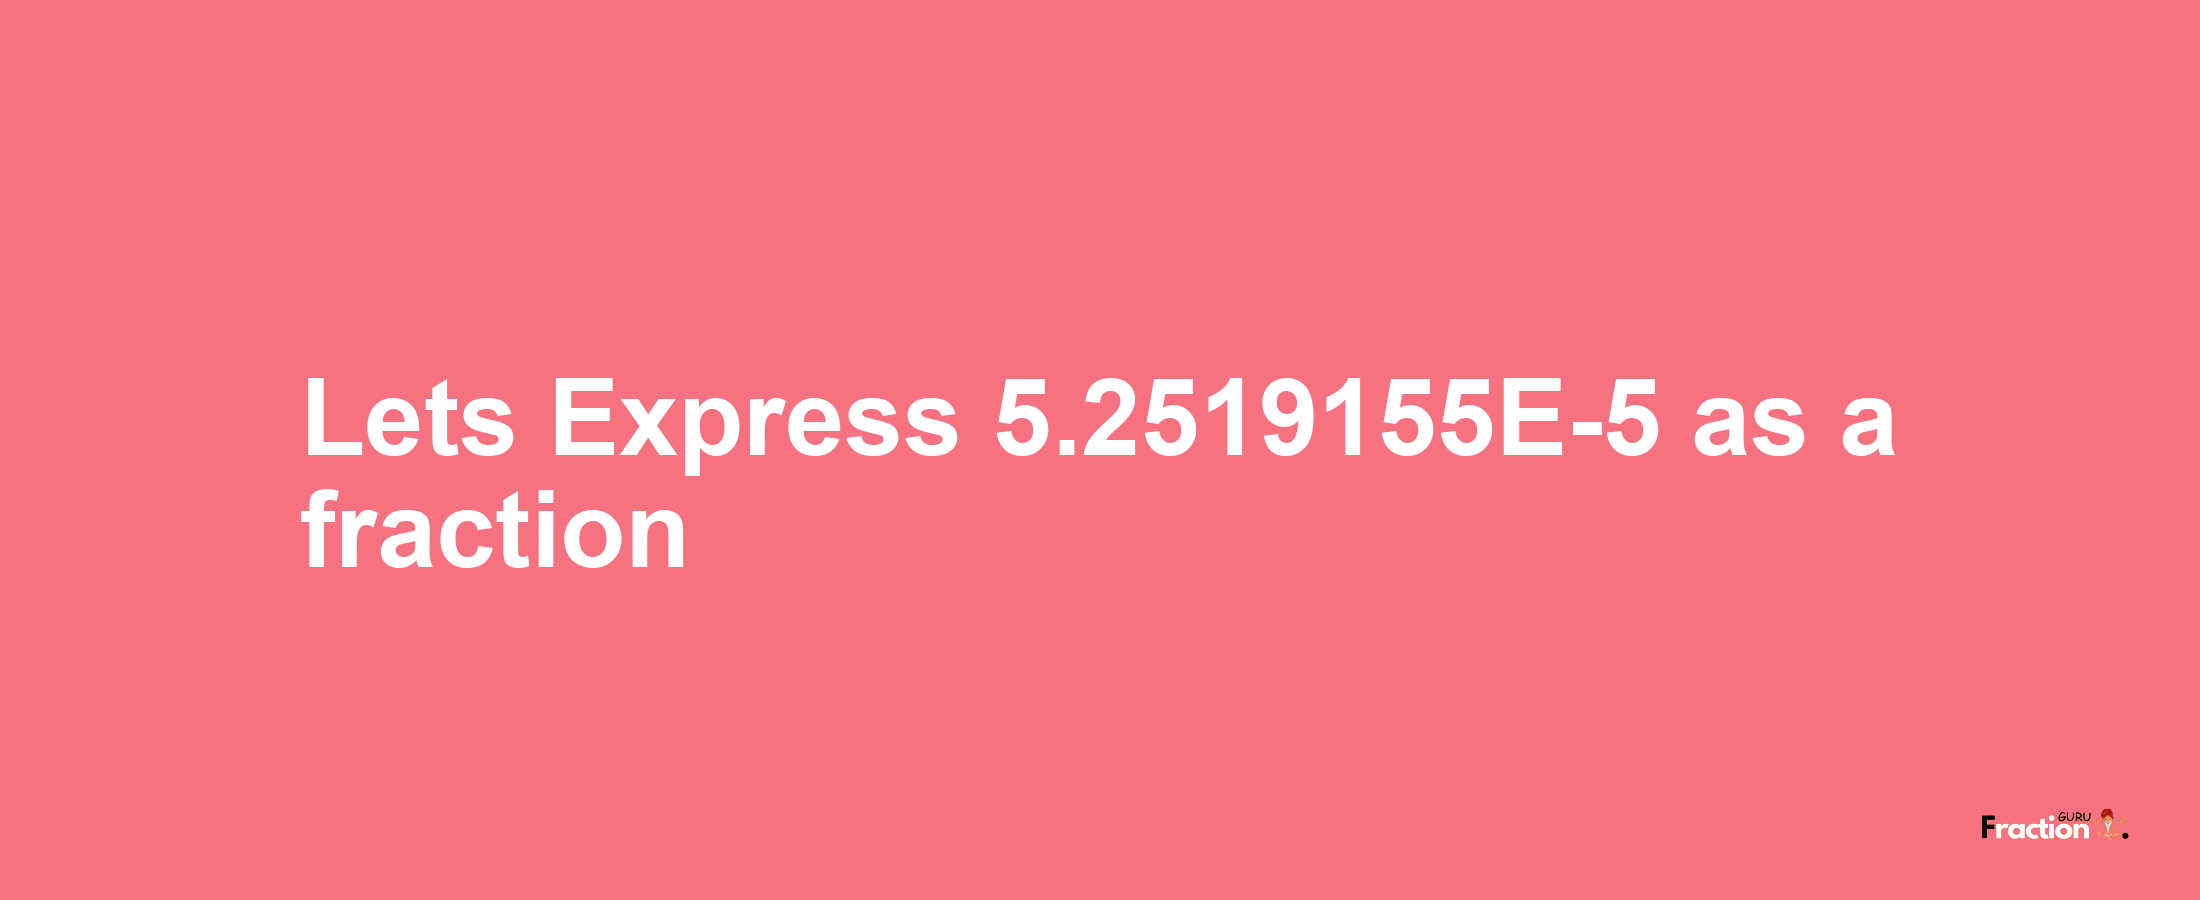 Lets Express 5.2519155E-5 as afraction